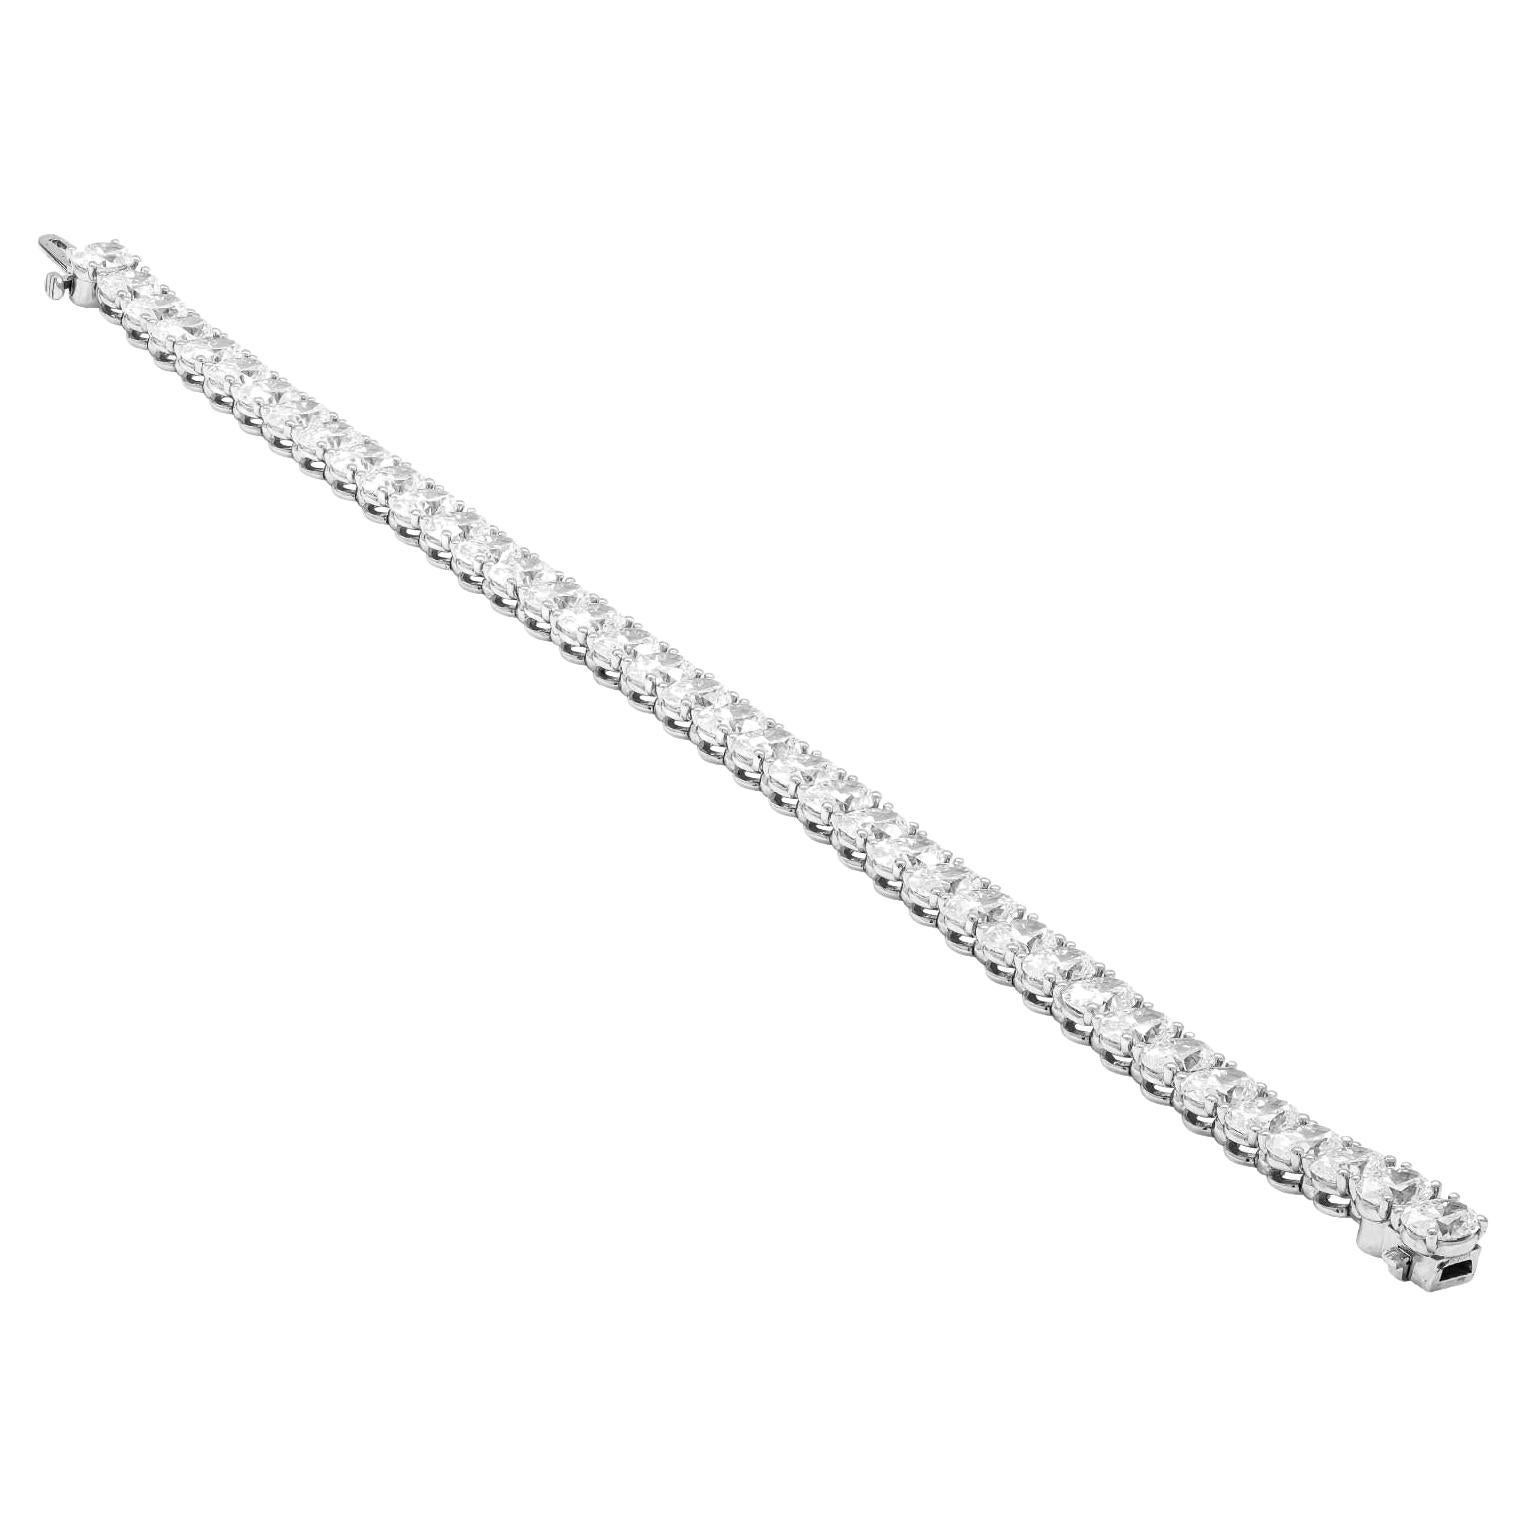 GIA Certified Oval diamonds bracelet in Platinum
39 stones: 0.40ct each
TCW: 15.60ct
7” long 

All stones GIA CERTIFIED:
0.40 E VS2 GIA#2427893710
0.40 D VS2 GIA#1429896075
0.40 D VS2 GIA#7422937100
0.40 F VS1 GIA#1415740538
0.40 D VS1